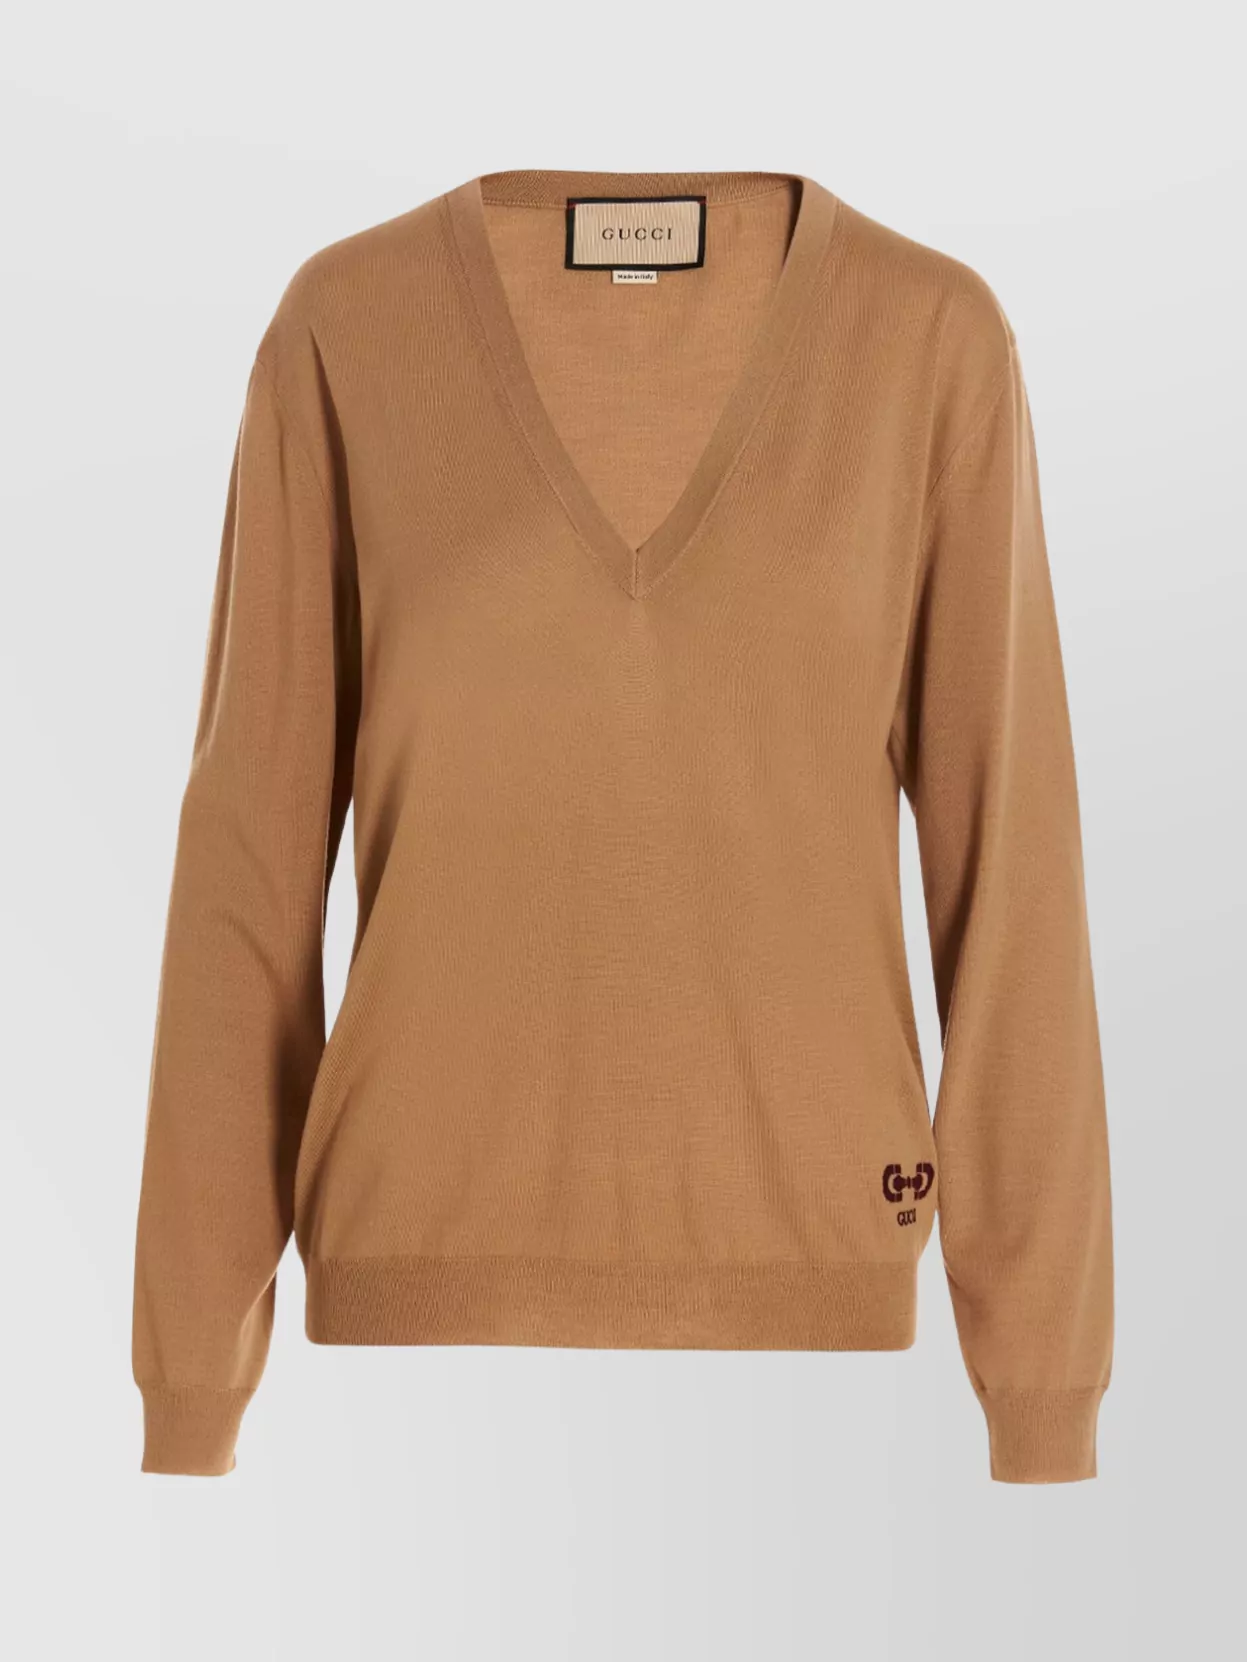 Gucci Logo V-neckline Knitwear Sweater With Long Sleeves In Brown